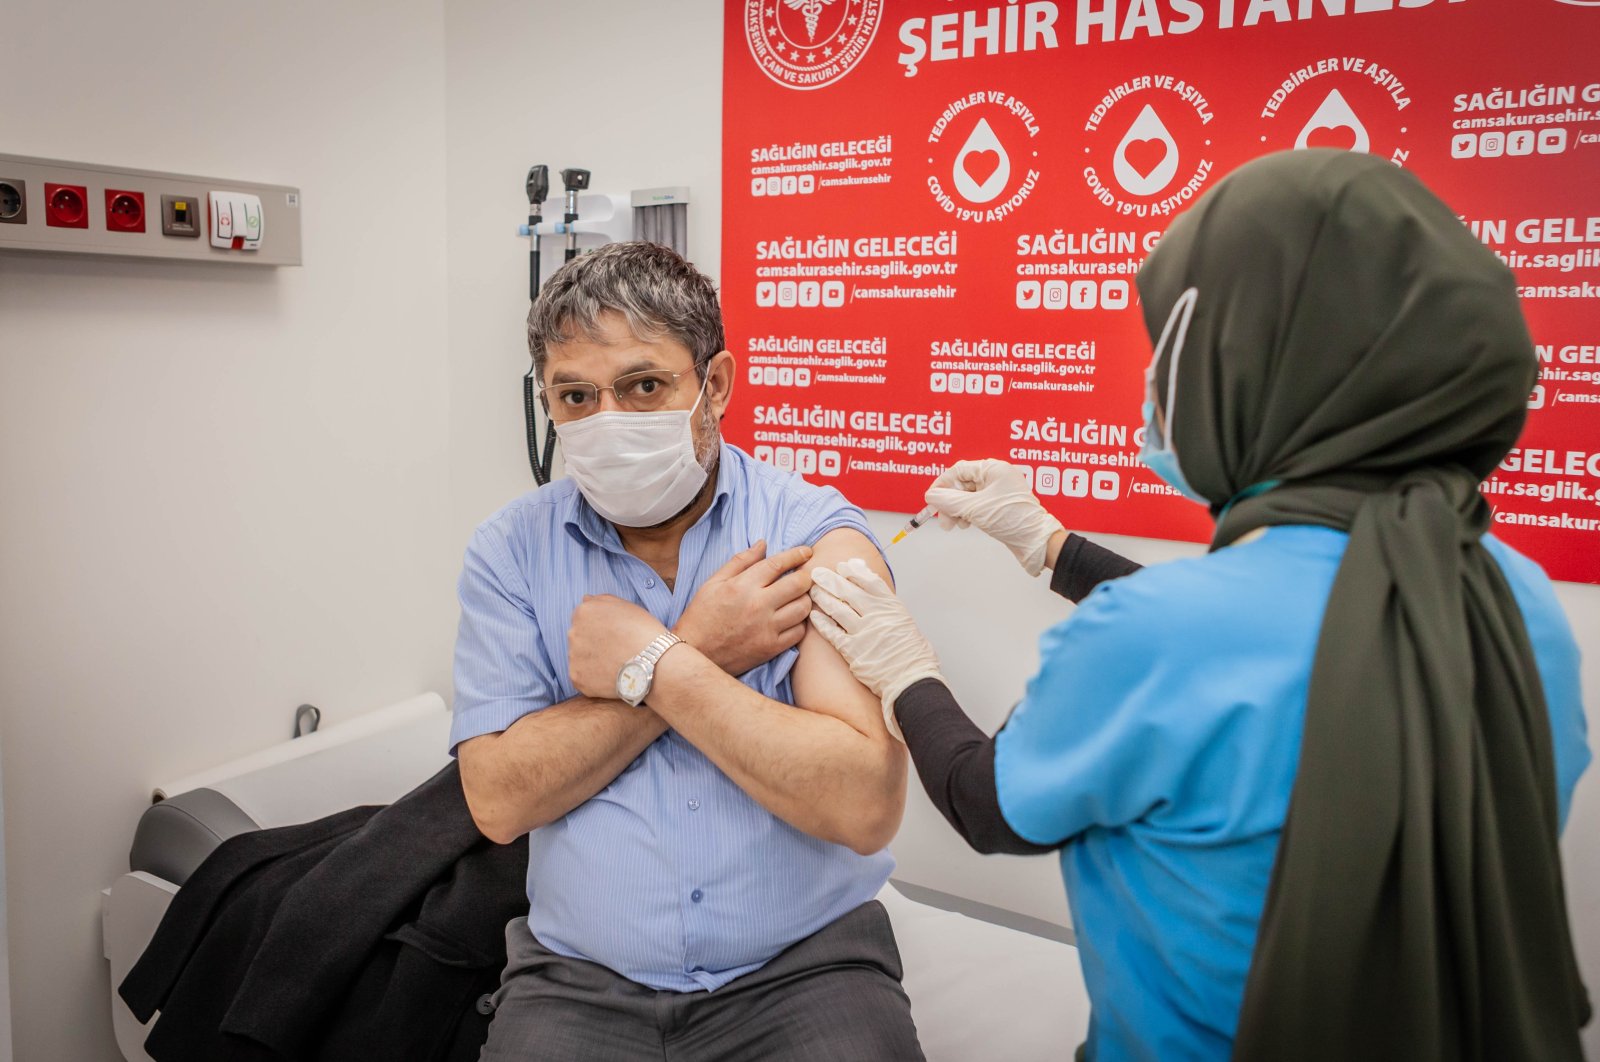 A man gets vaccinated with the locally made COVID-19 vaccine Turkovac at a hospital, in Istanbul, Turkey, Jan. 13, 2022. (Photo by Hatice Çınar)